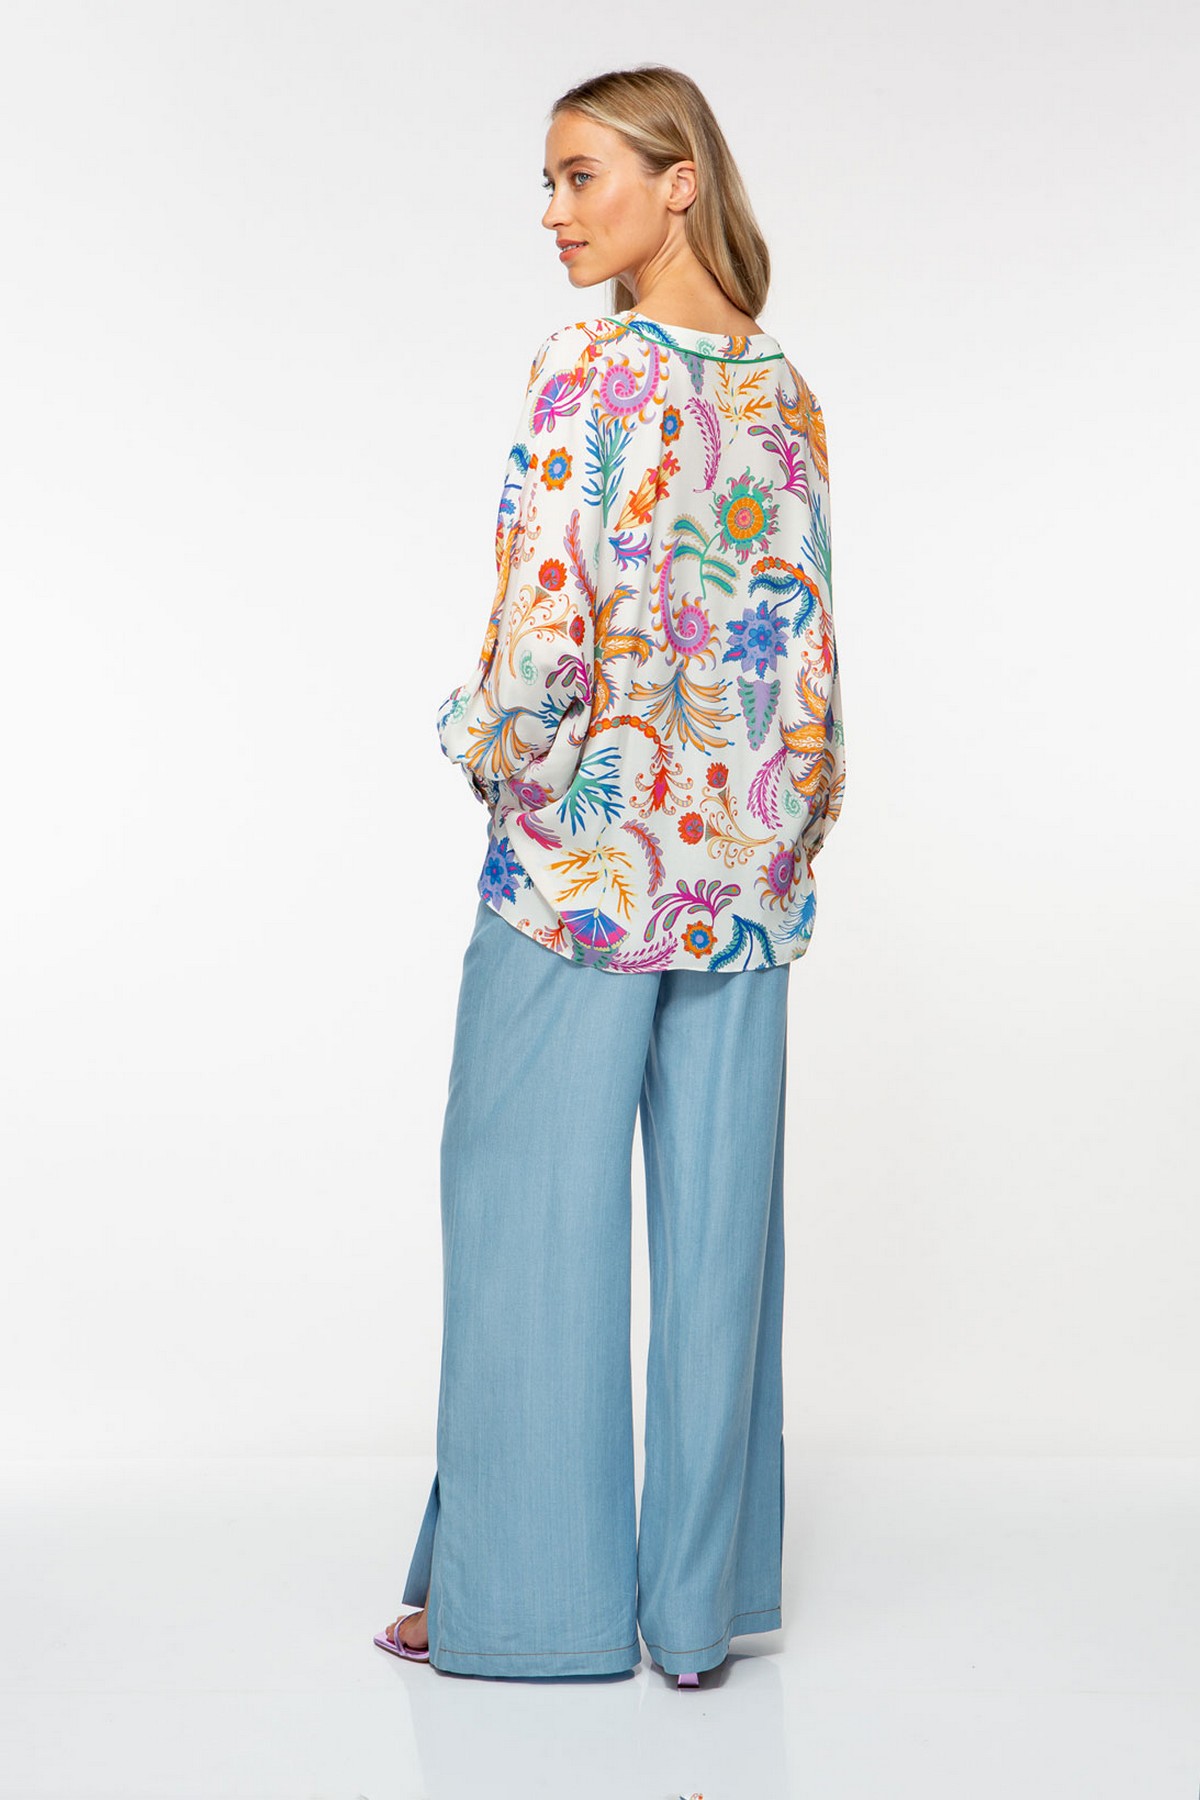 Ivi Collection - Seastar Tunic - Bloes V print multicolor